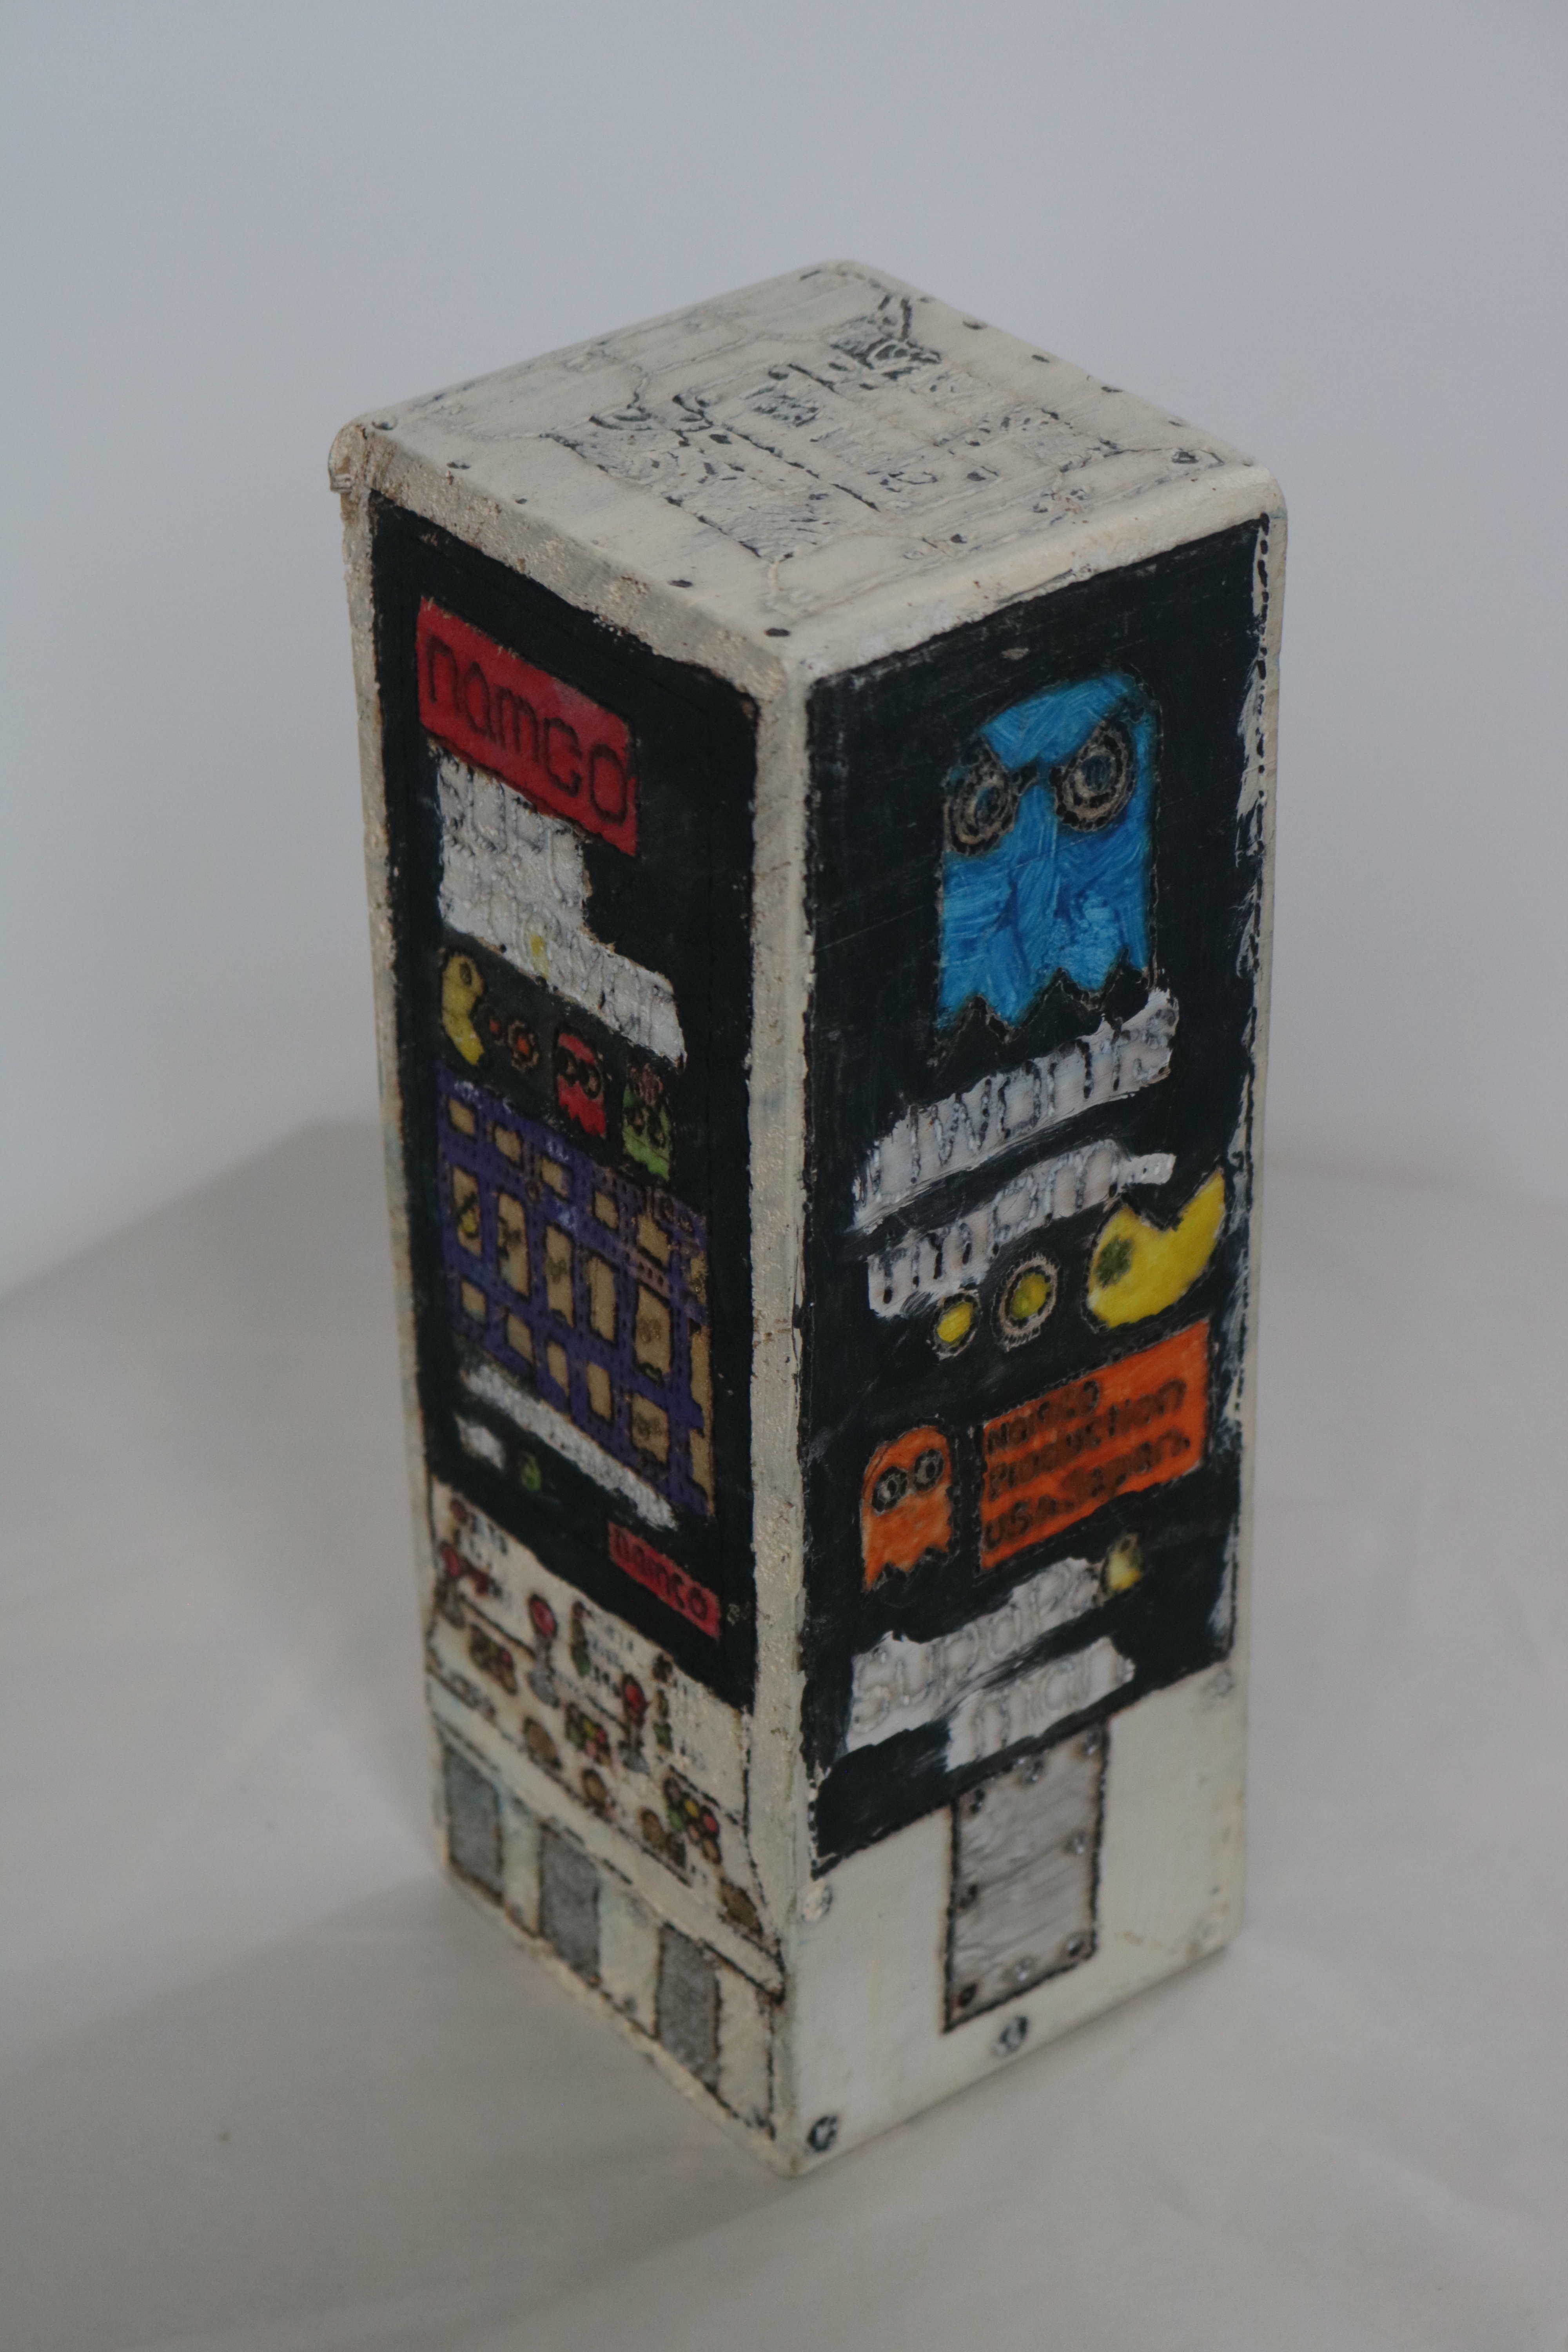 A wooden block with the word Namco on top. There are shaped of the bitton and joystick painted on. there are classic pacman ghosts, and of course pacman himself.